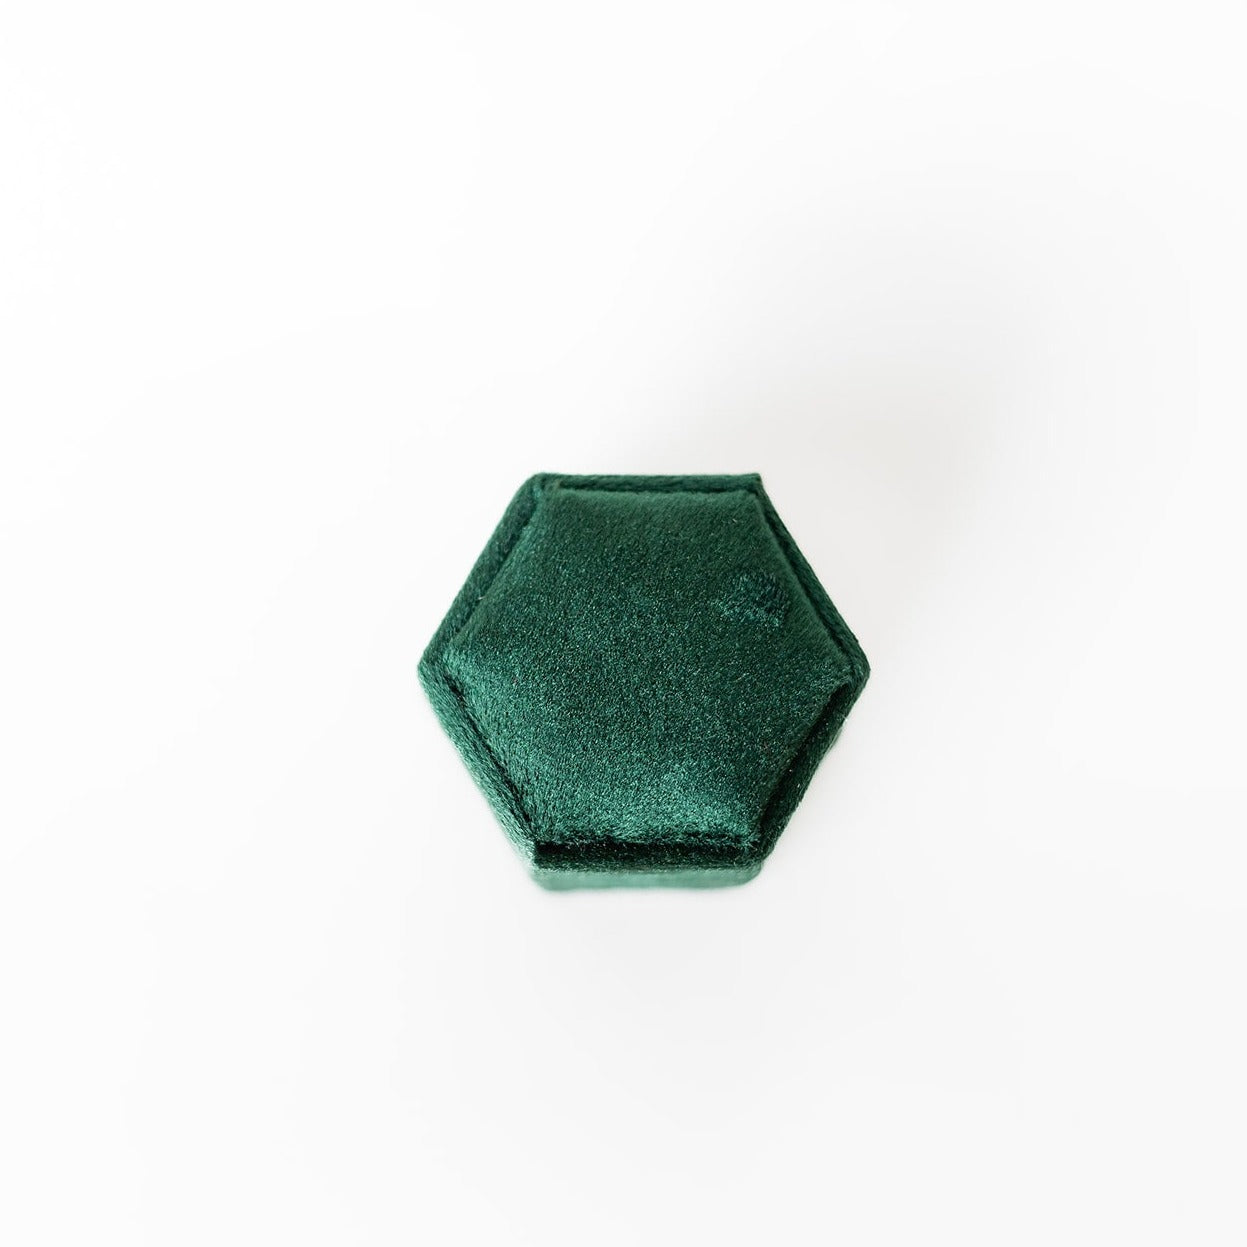 The outside of an emerald hexagon ring box.